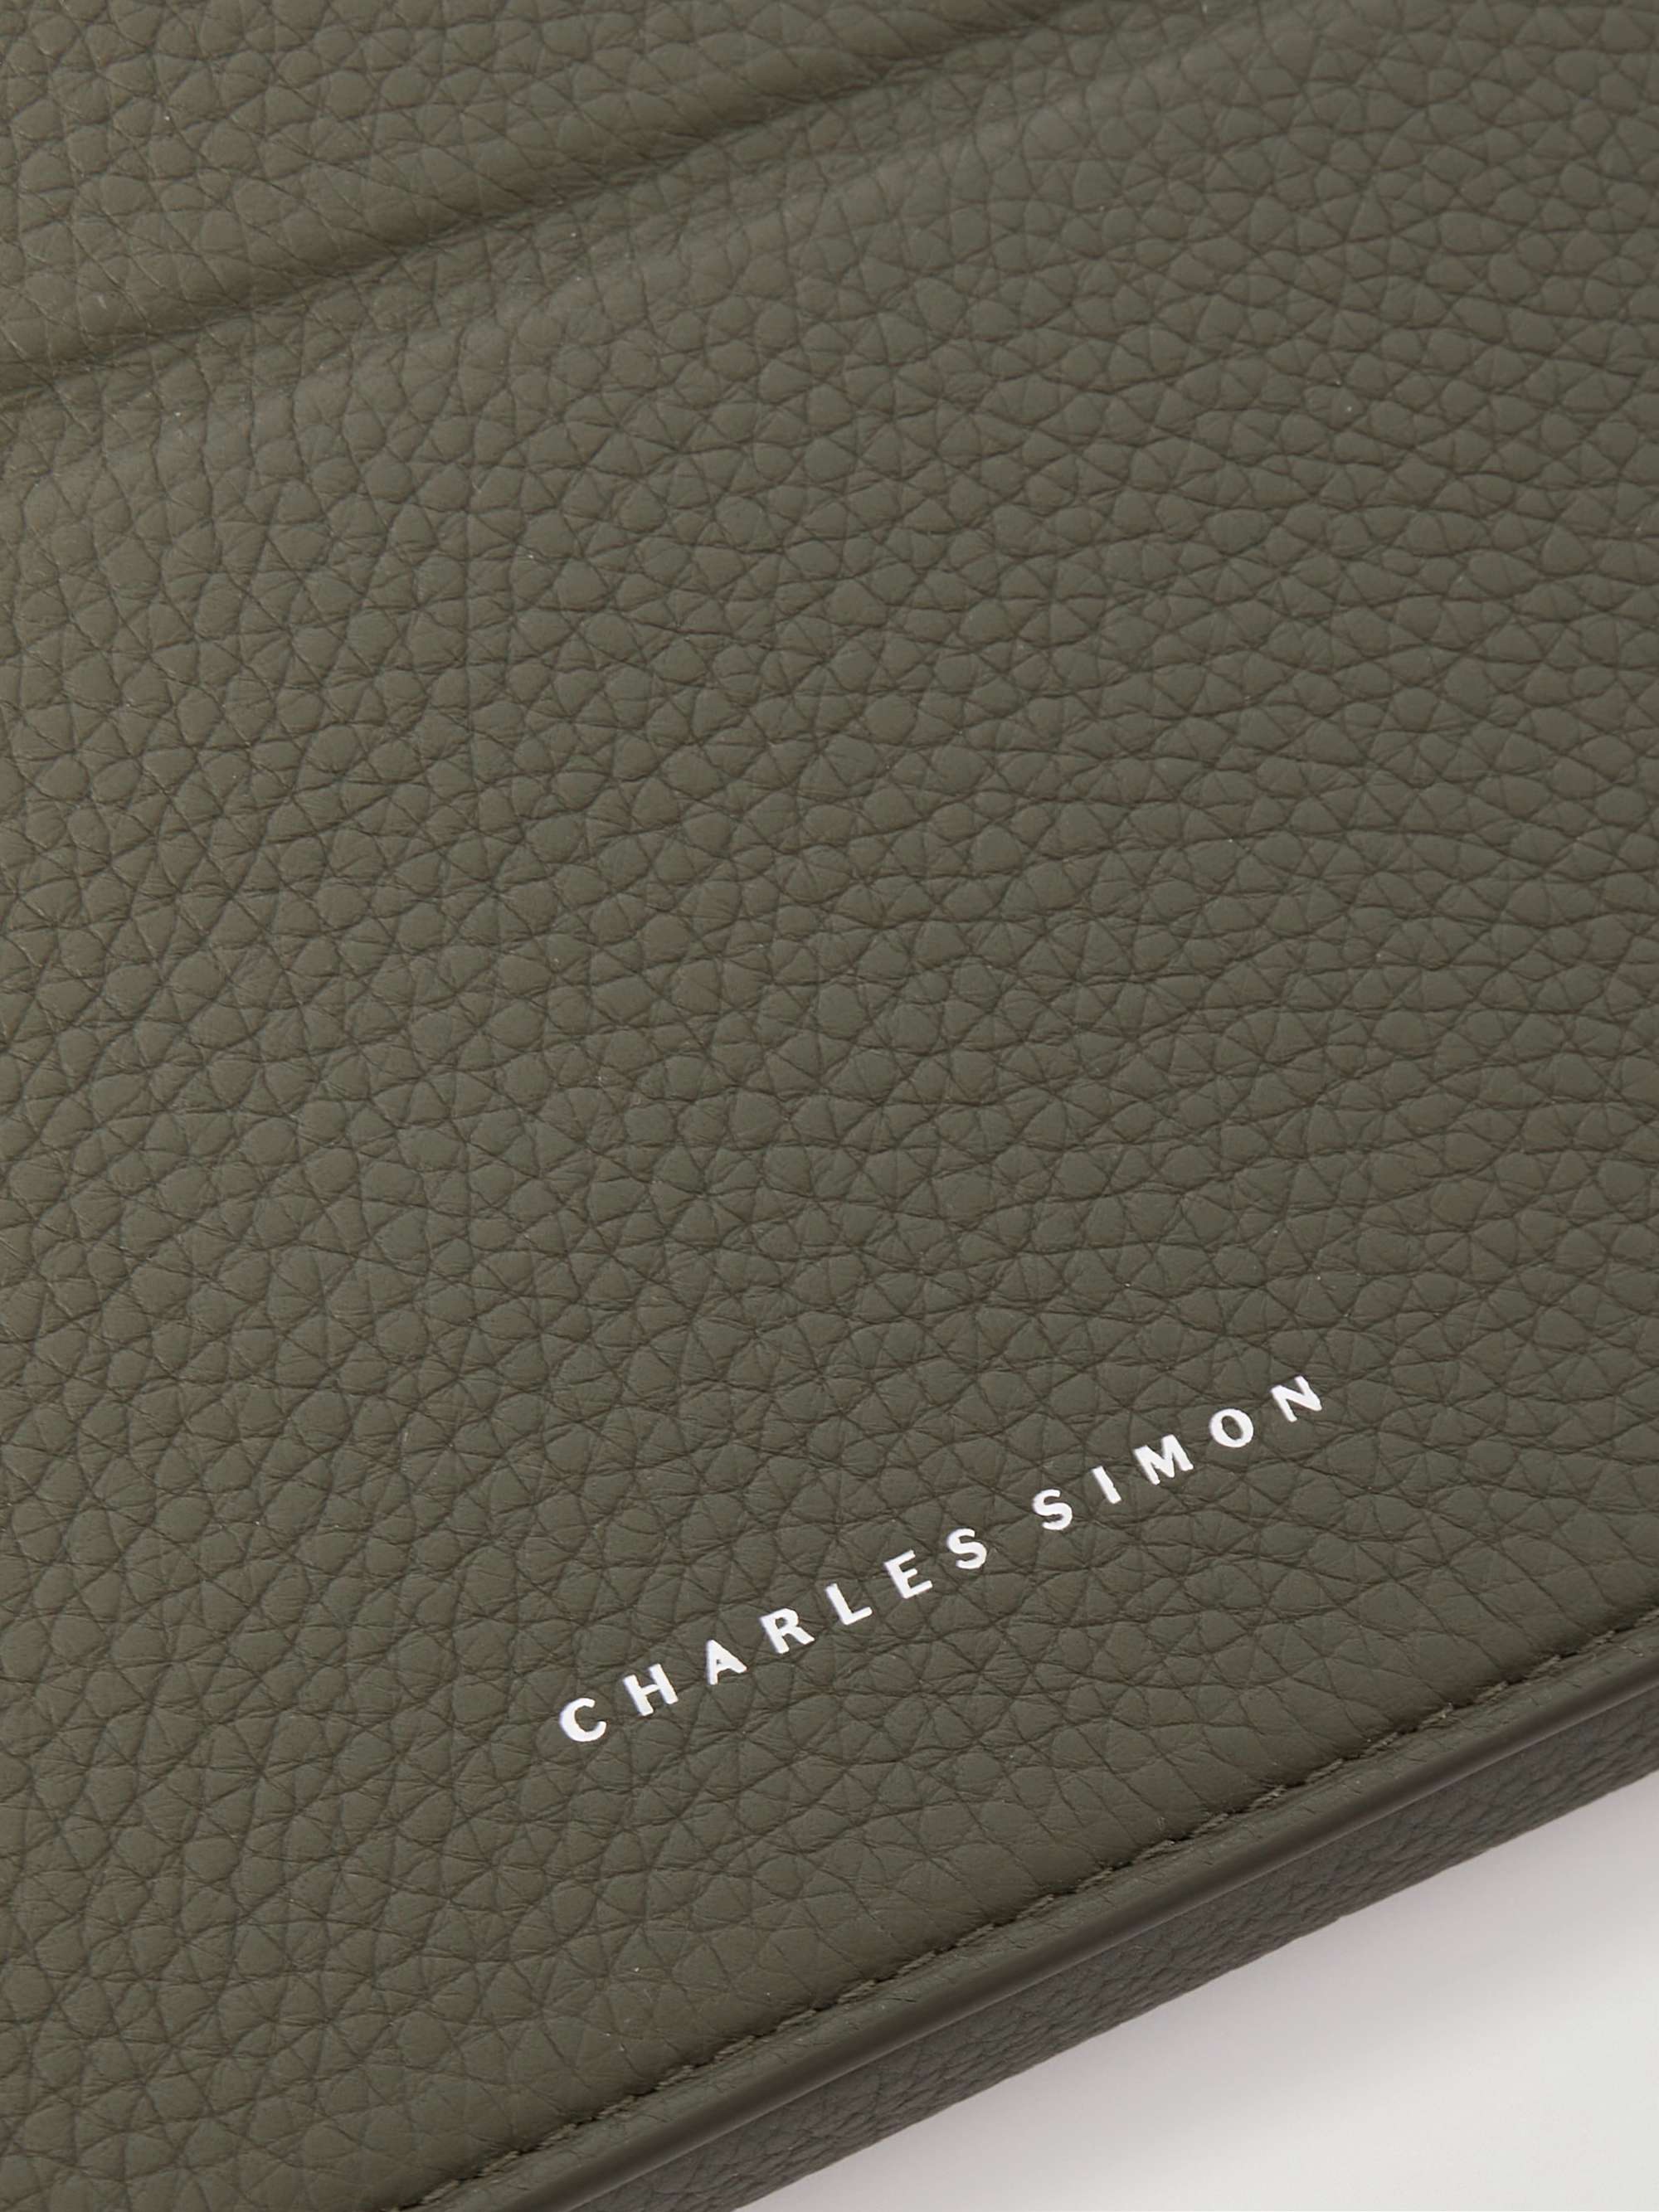 CHARLES SIMON Logo-Print Full-Grain Leather and Silver-Tone Travel Wallet